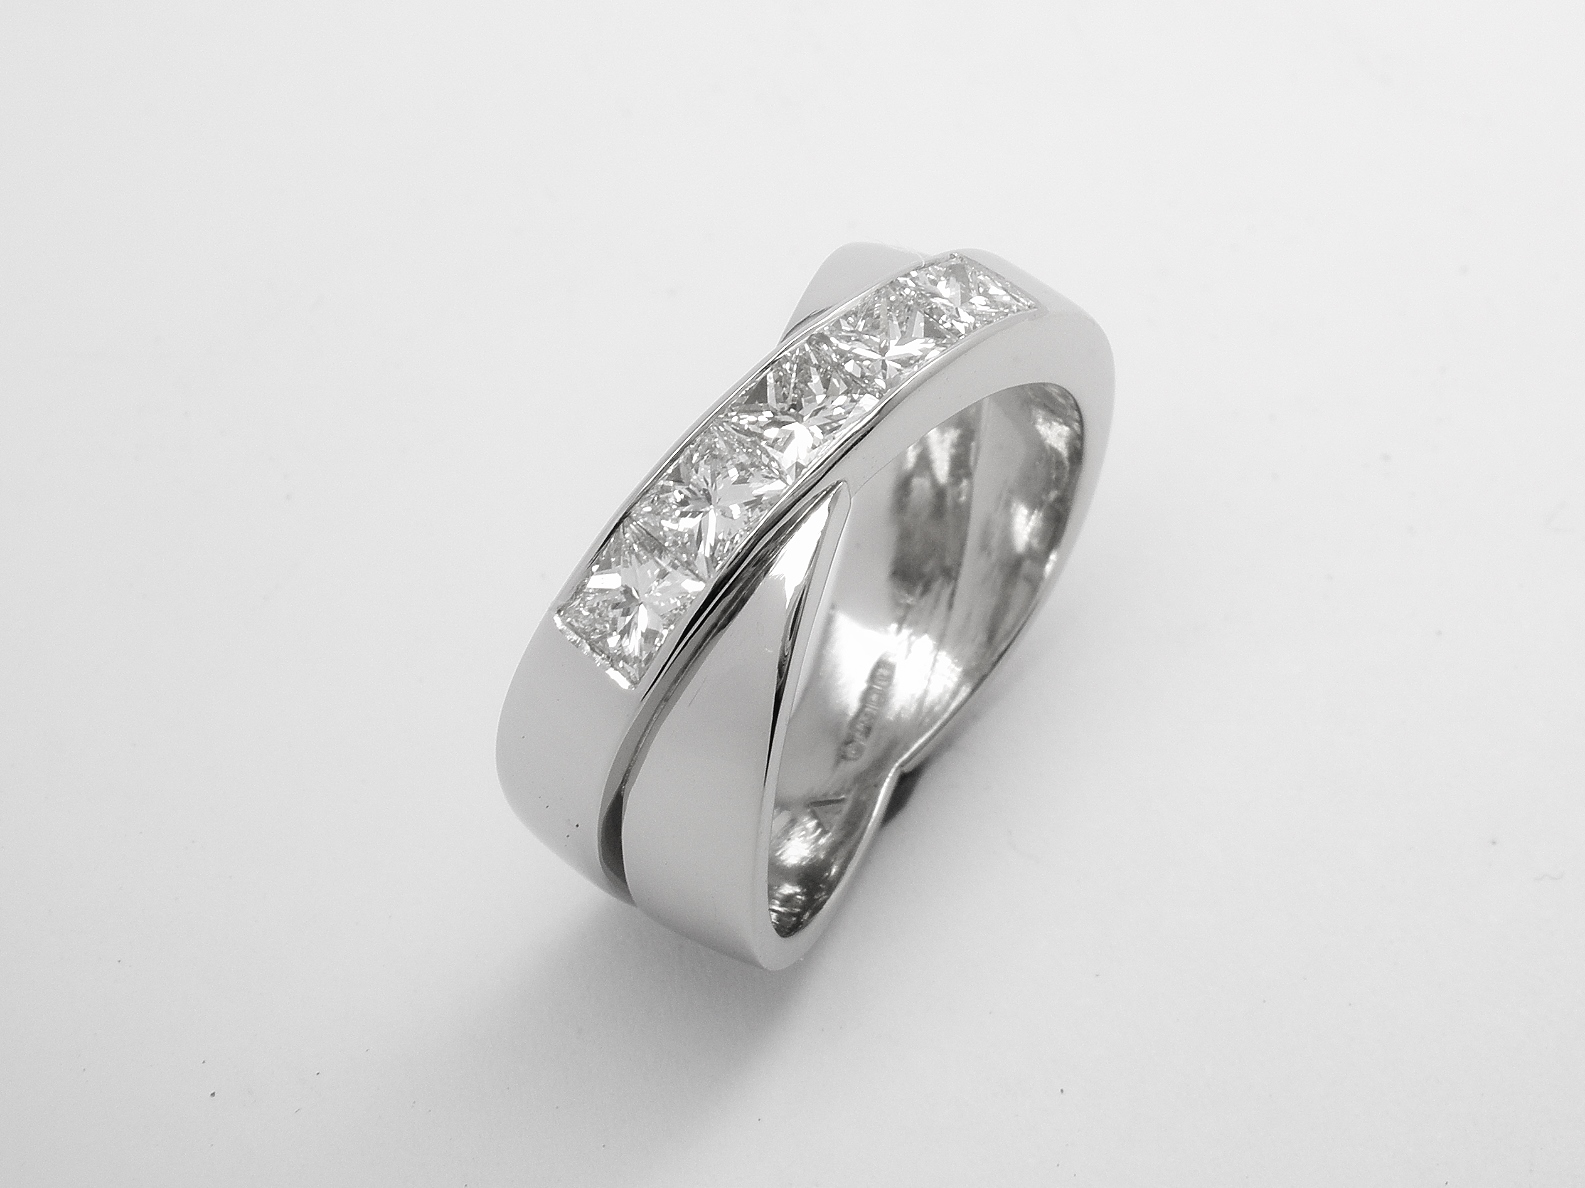 A 5 stone channel set princess cut diamond 'X' style ring mounted in platinum.